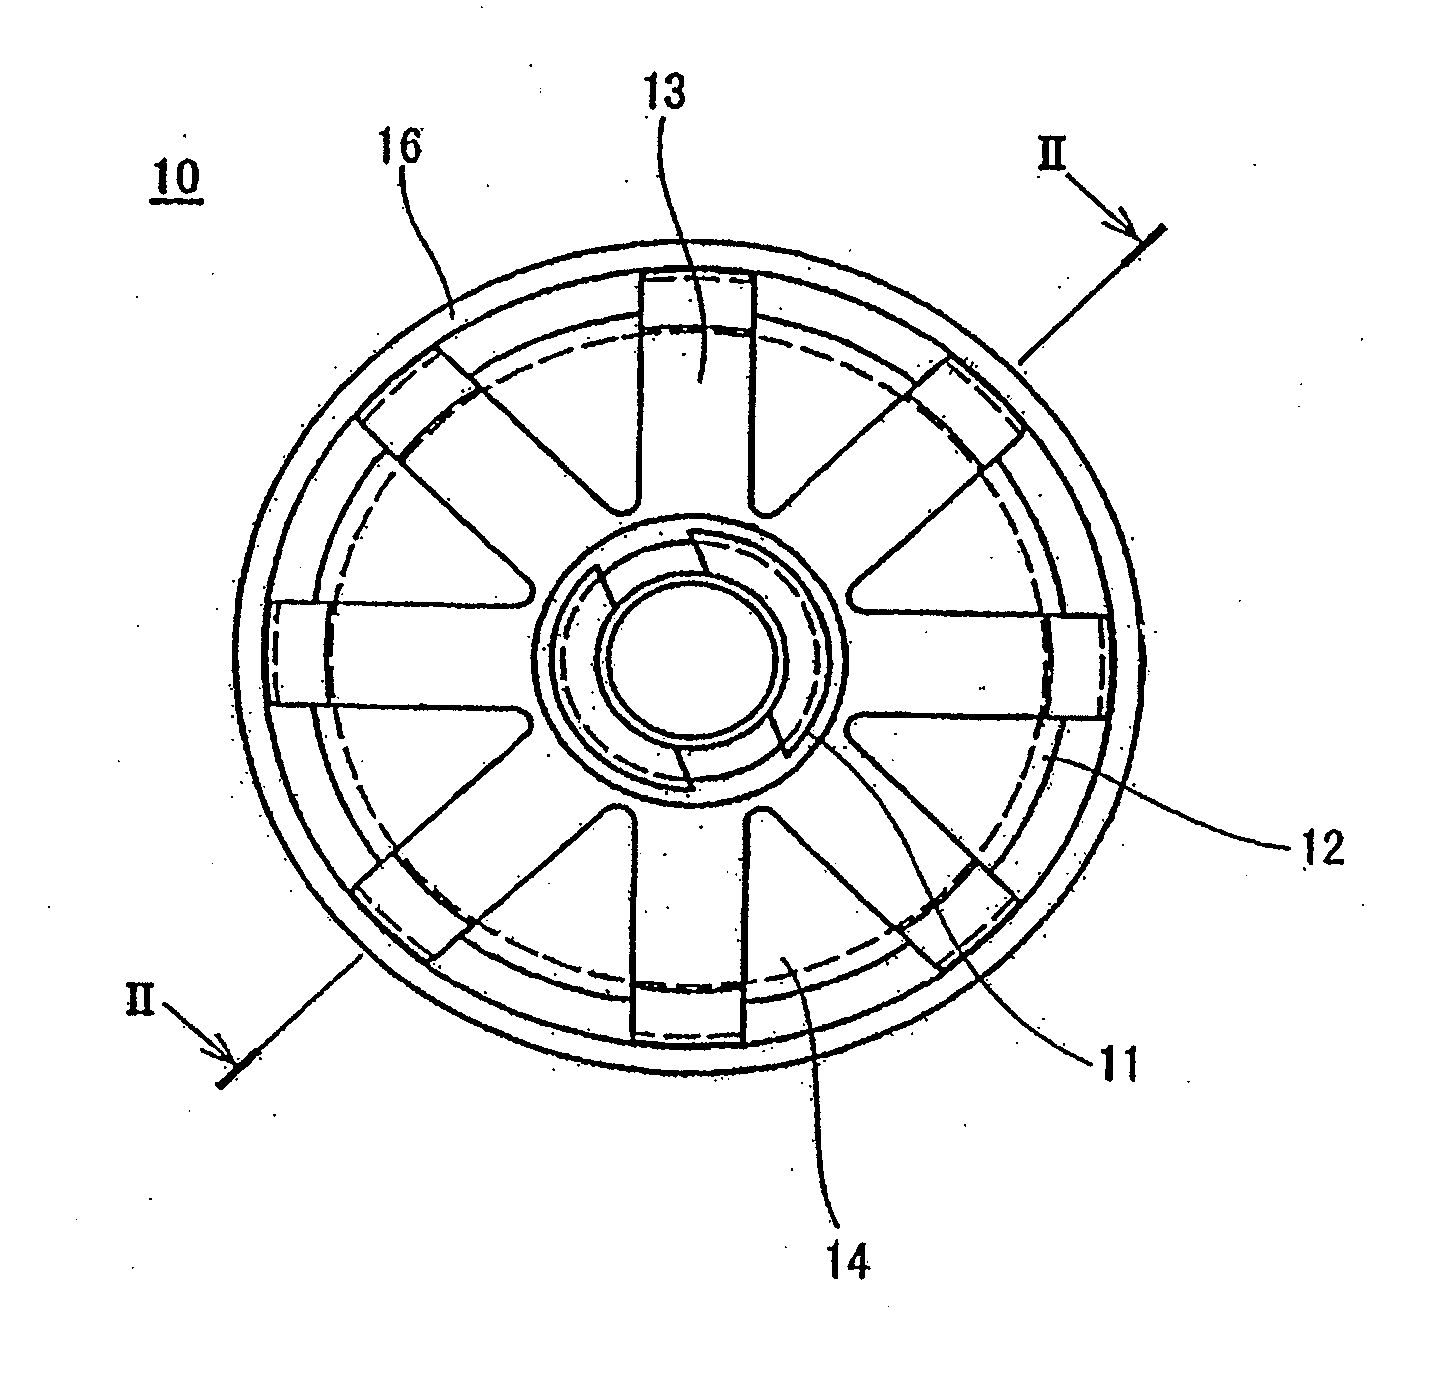 Grommet and forming method for the grommet